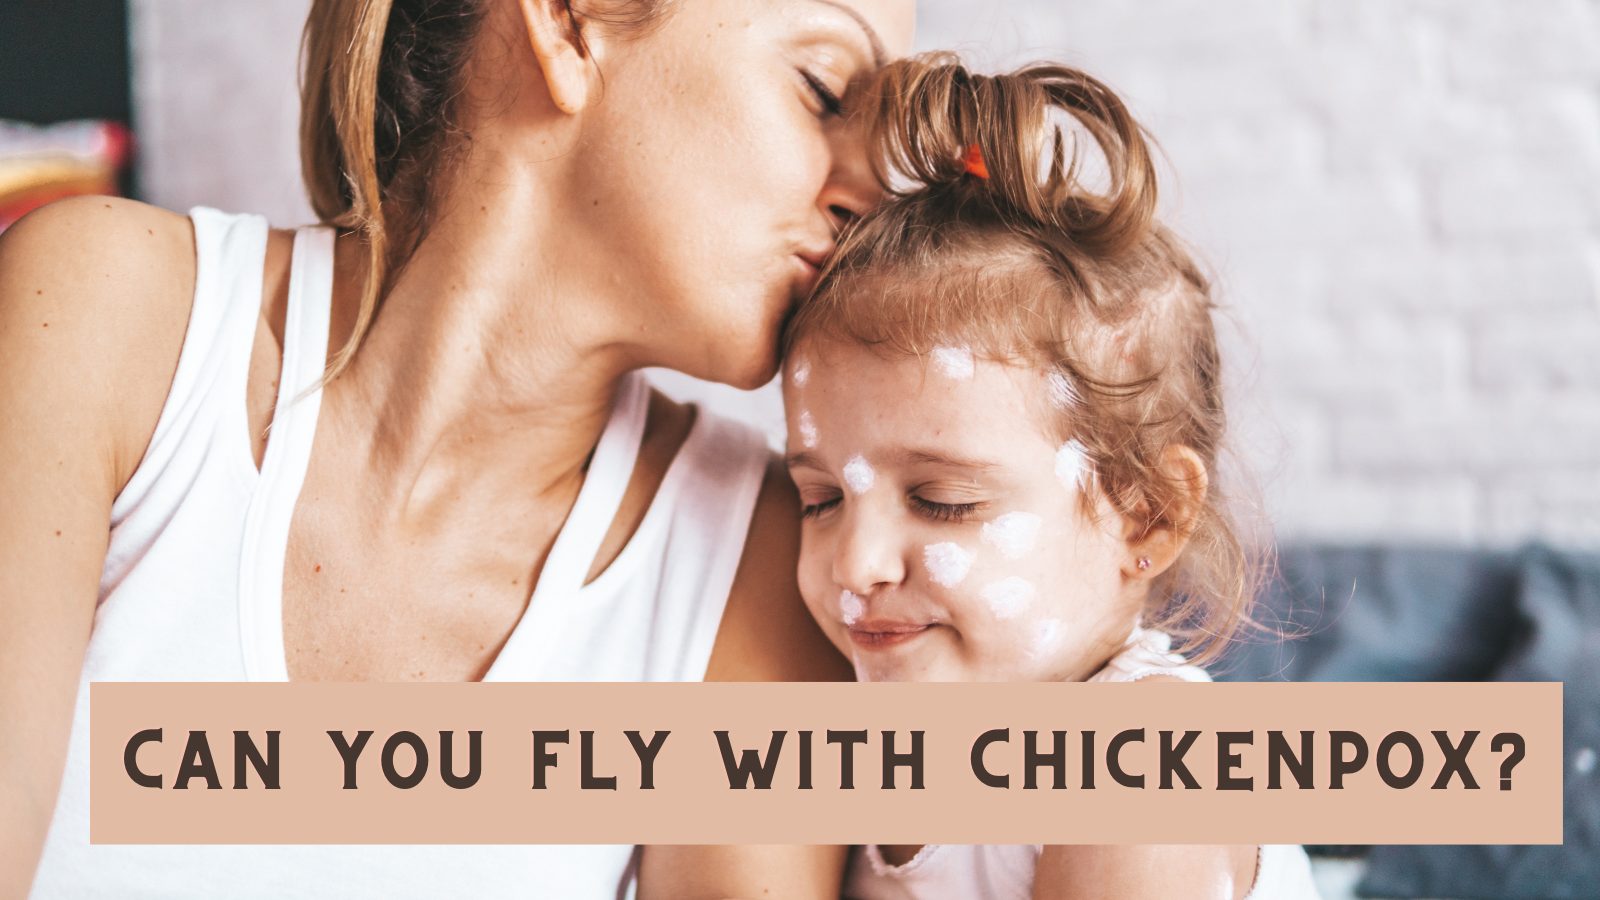 Can you fly with chickenpox?